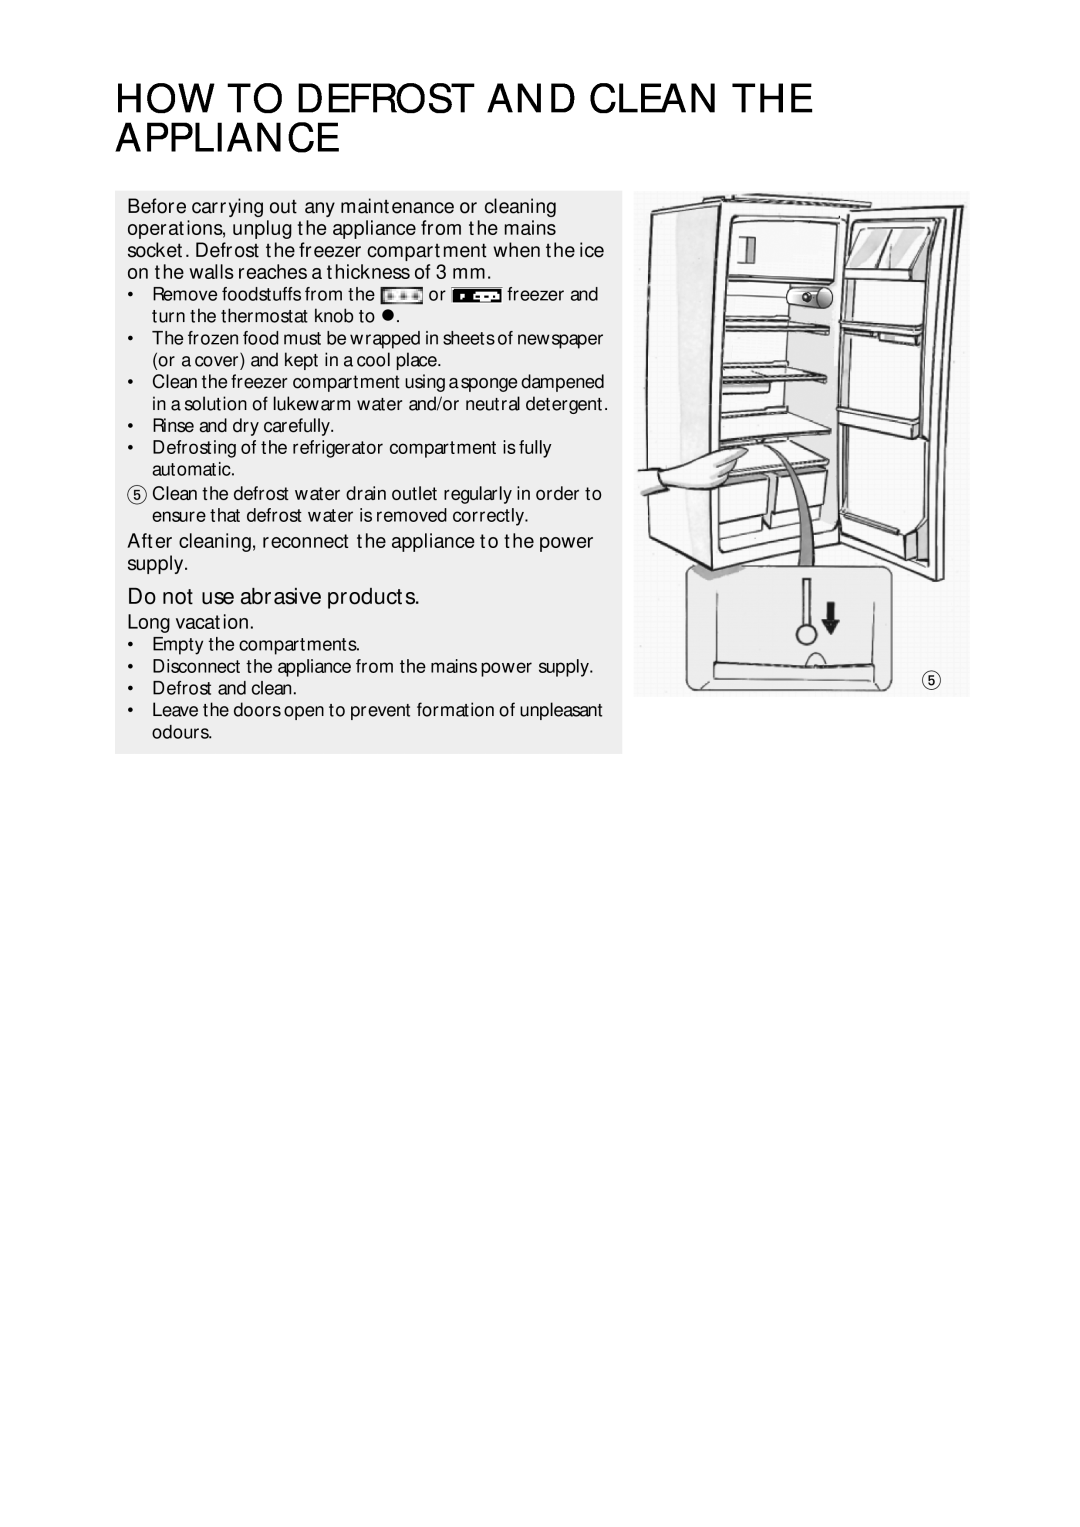 CDA FW420 manual How To Defrost And Clean The Appliance, Do not use abrasive products, Long vacation 